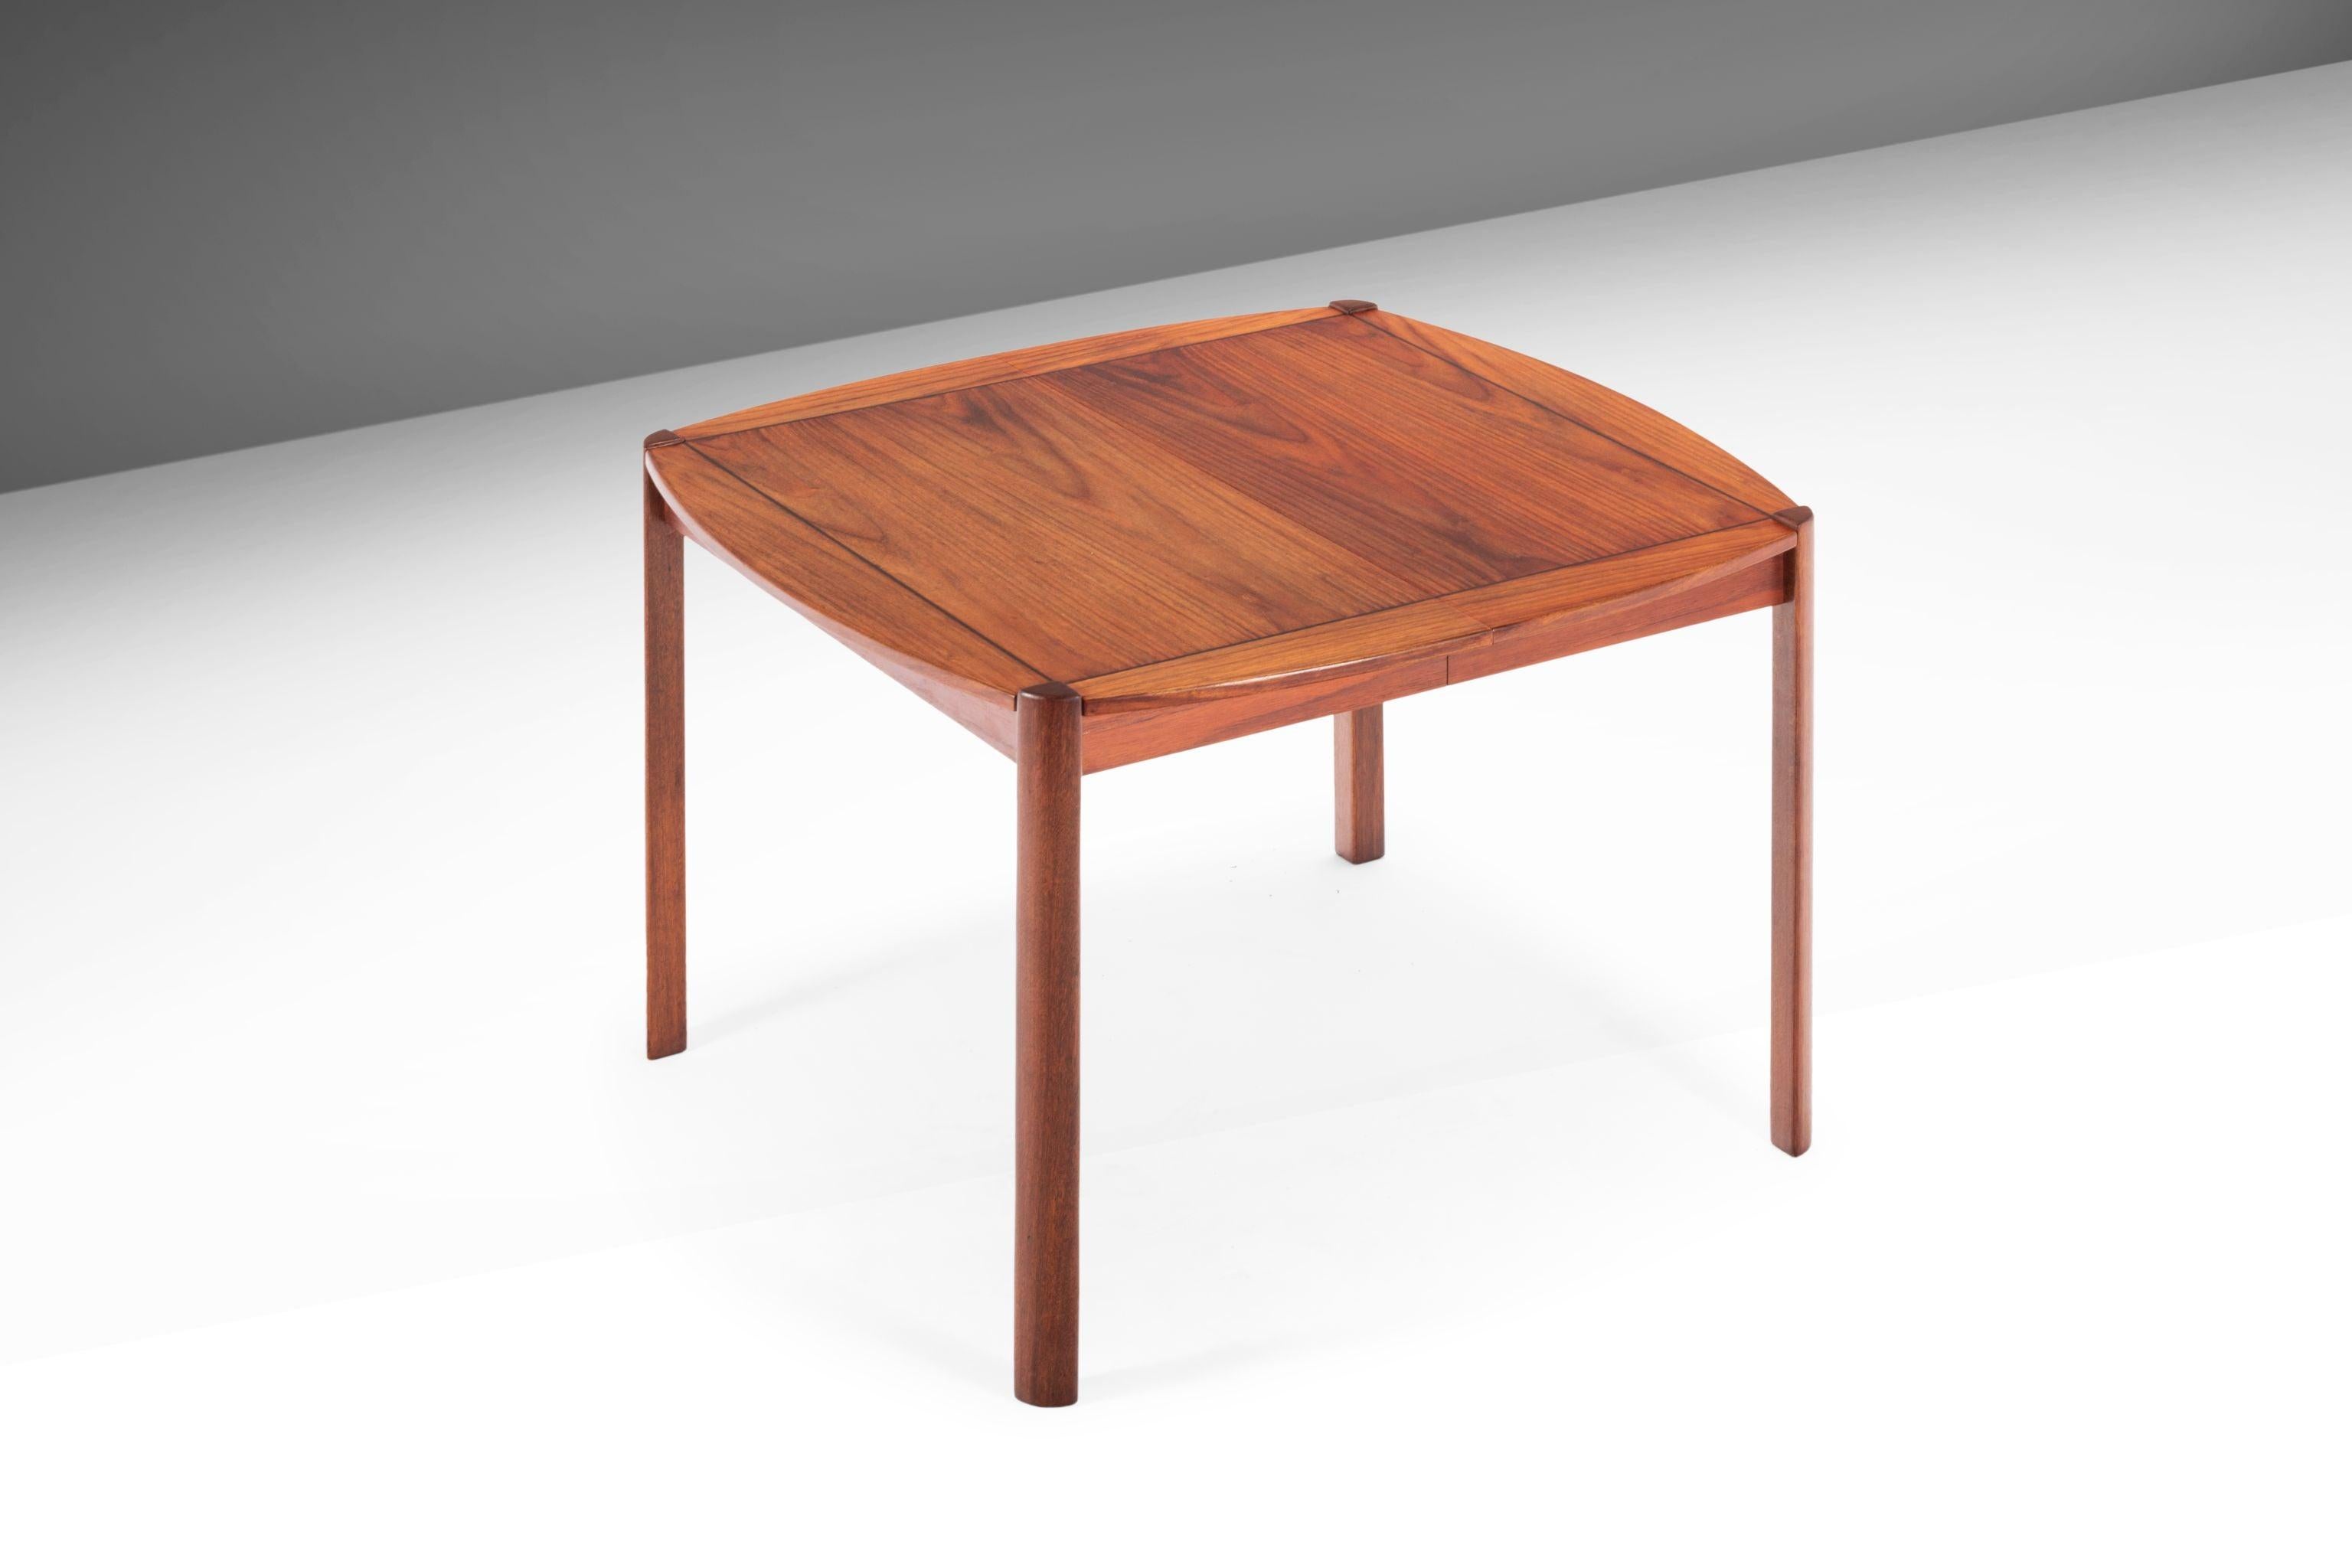 Mid-20th Century Exquisite Danish Modern Extension Dining Table in Teak, Denmark, c. 1960's For Sale